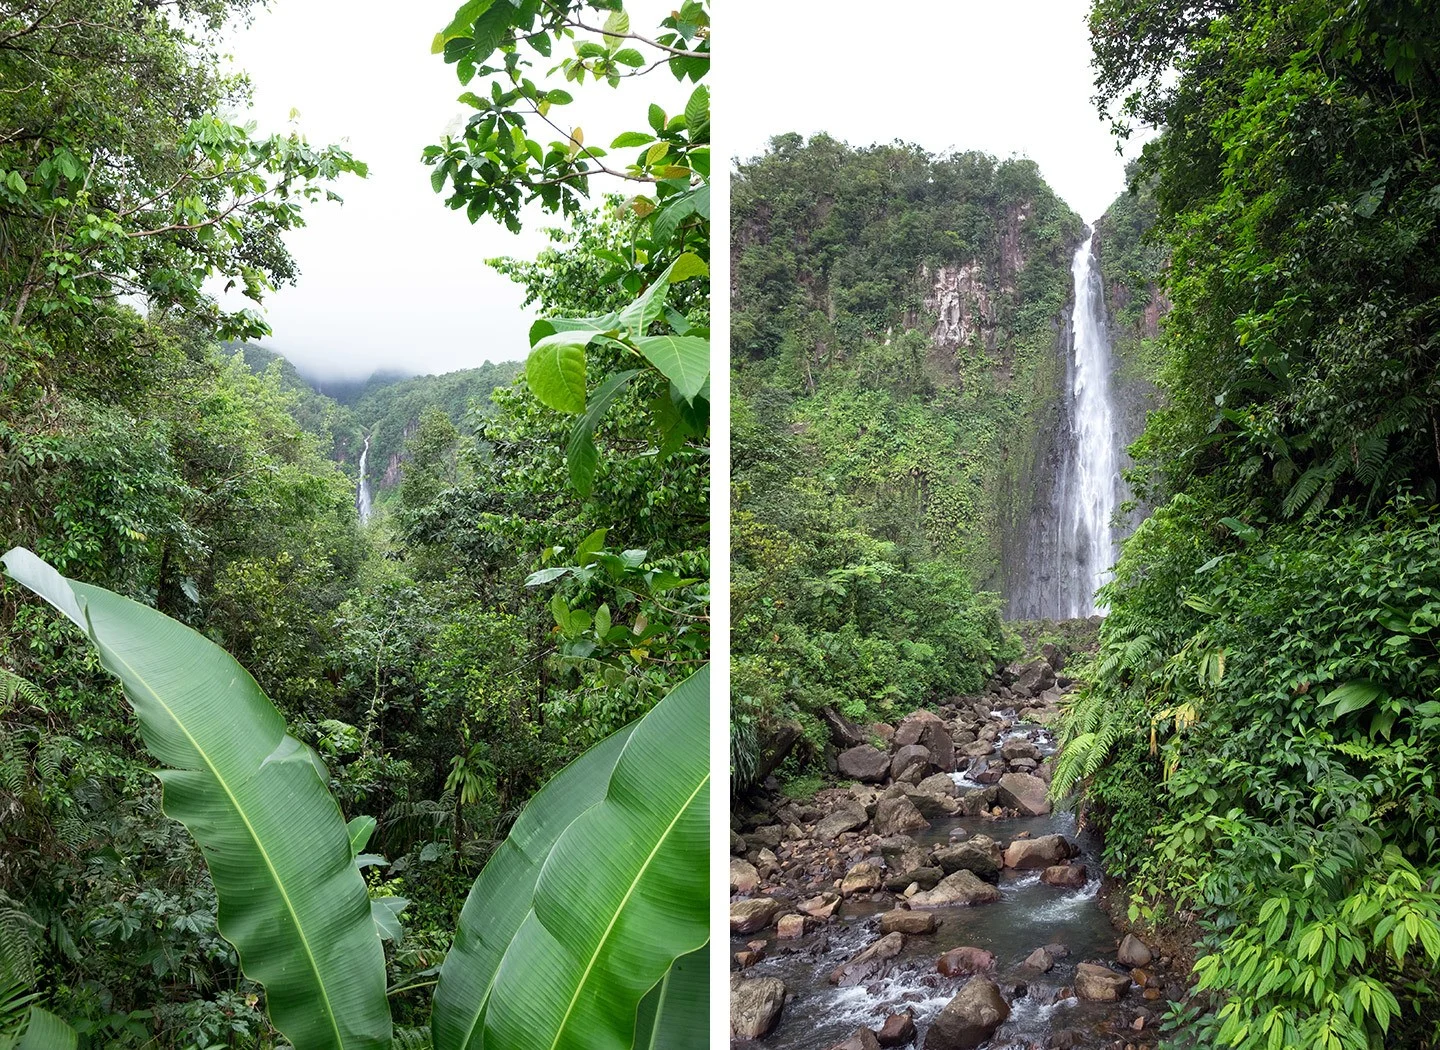 The Chutes du Carbet waterfalls in Guadeloupe